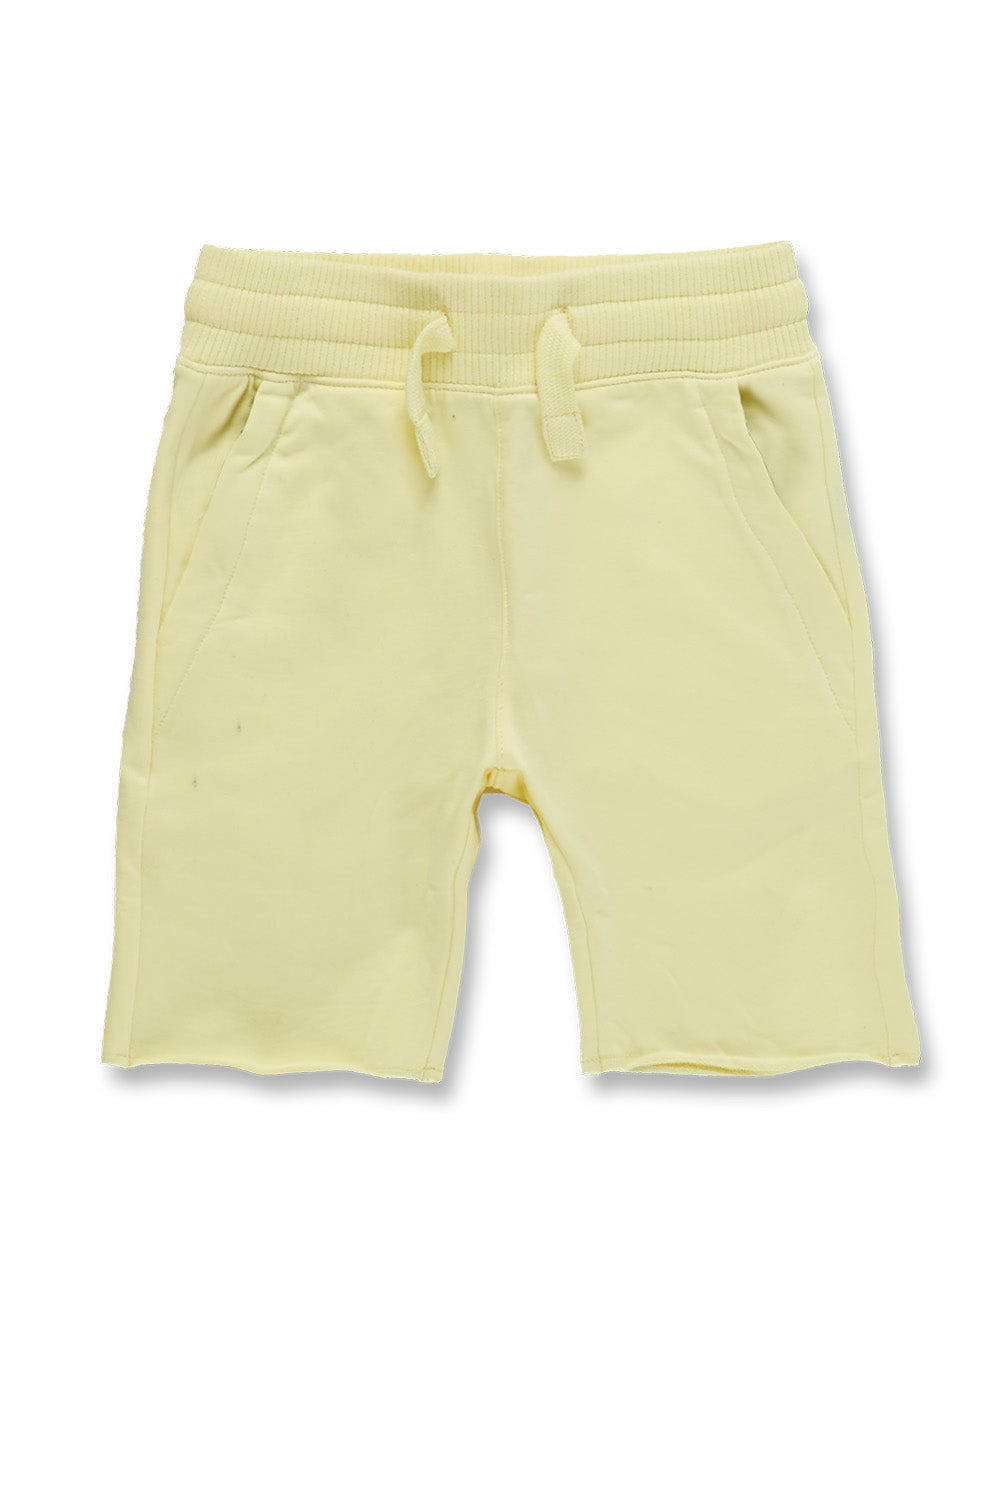 JC Kids Kids Palma French Terry Shorts (Exclusive) (Memorial Day Markdown) Pale Yellow / 2